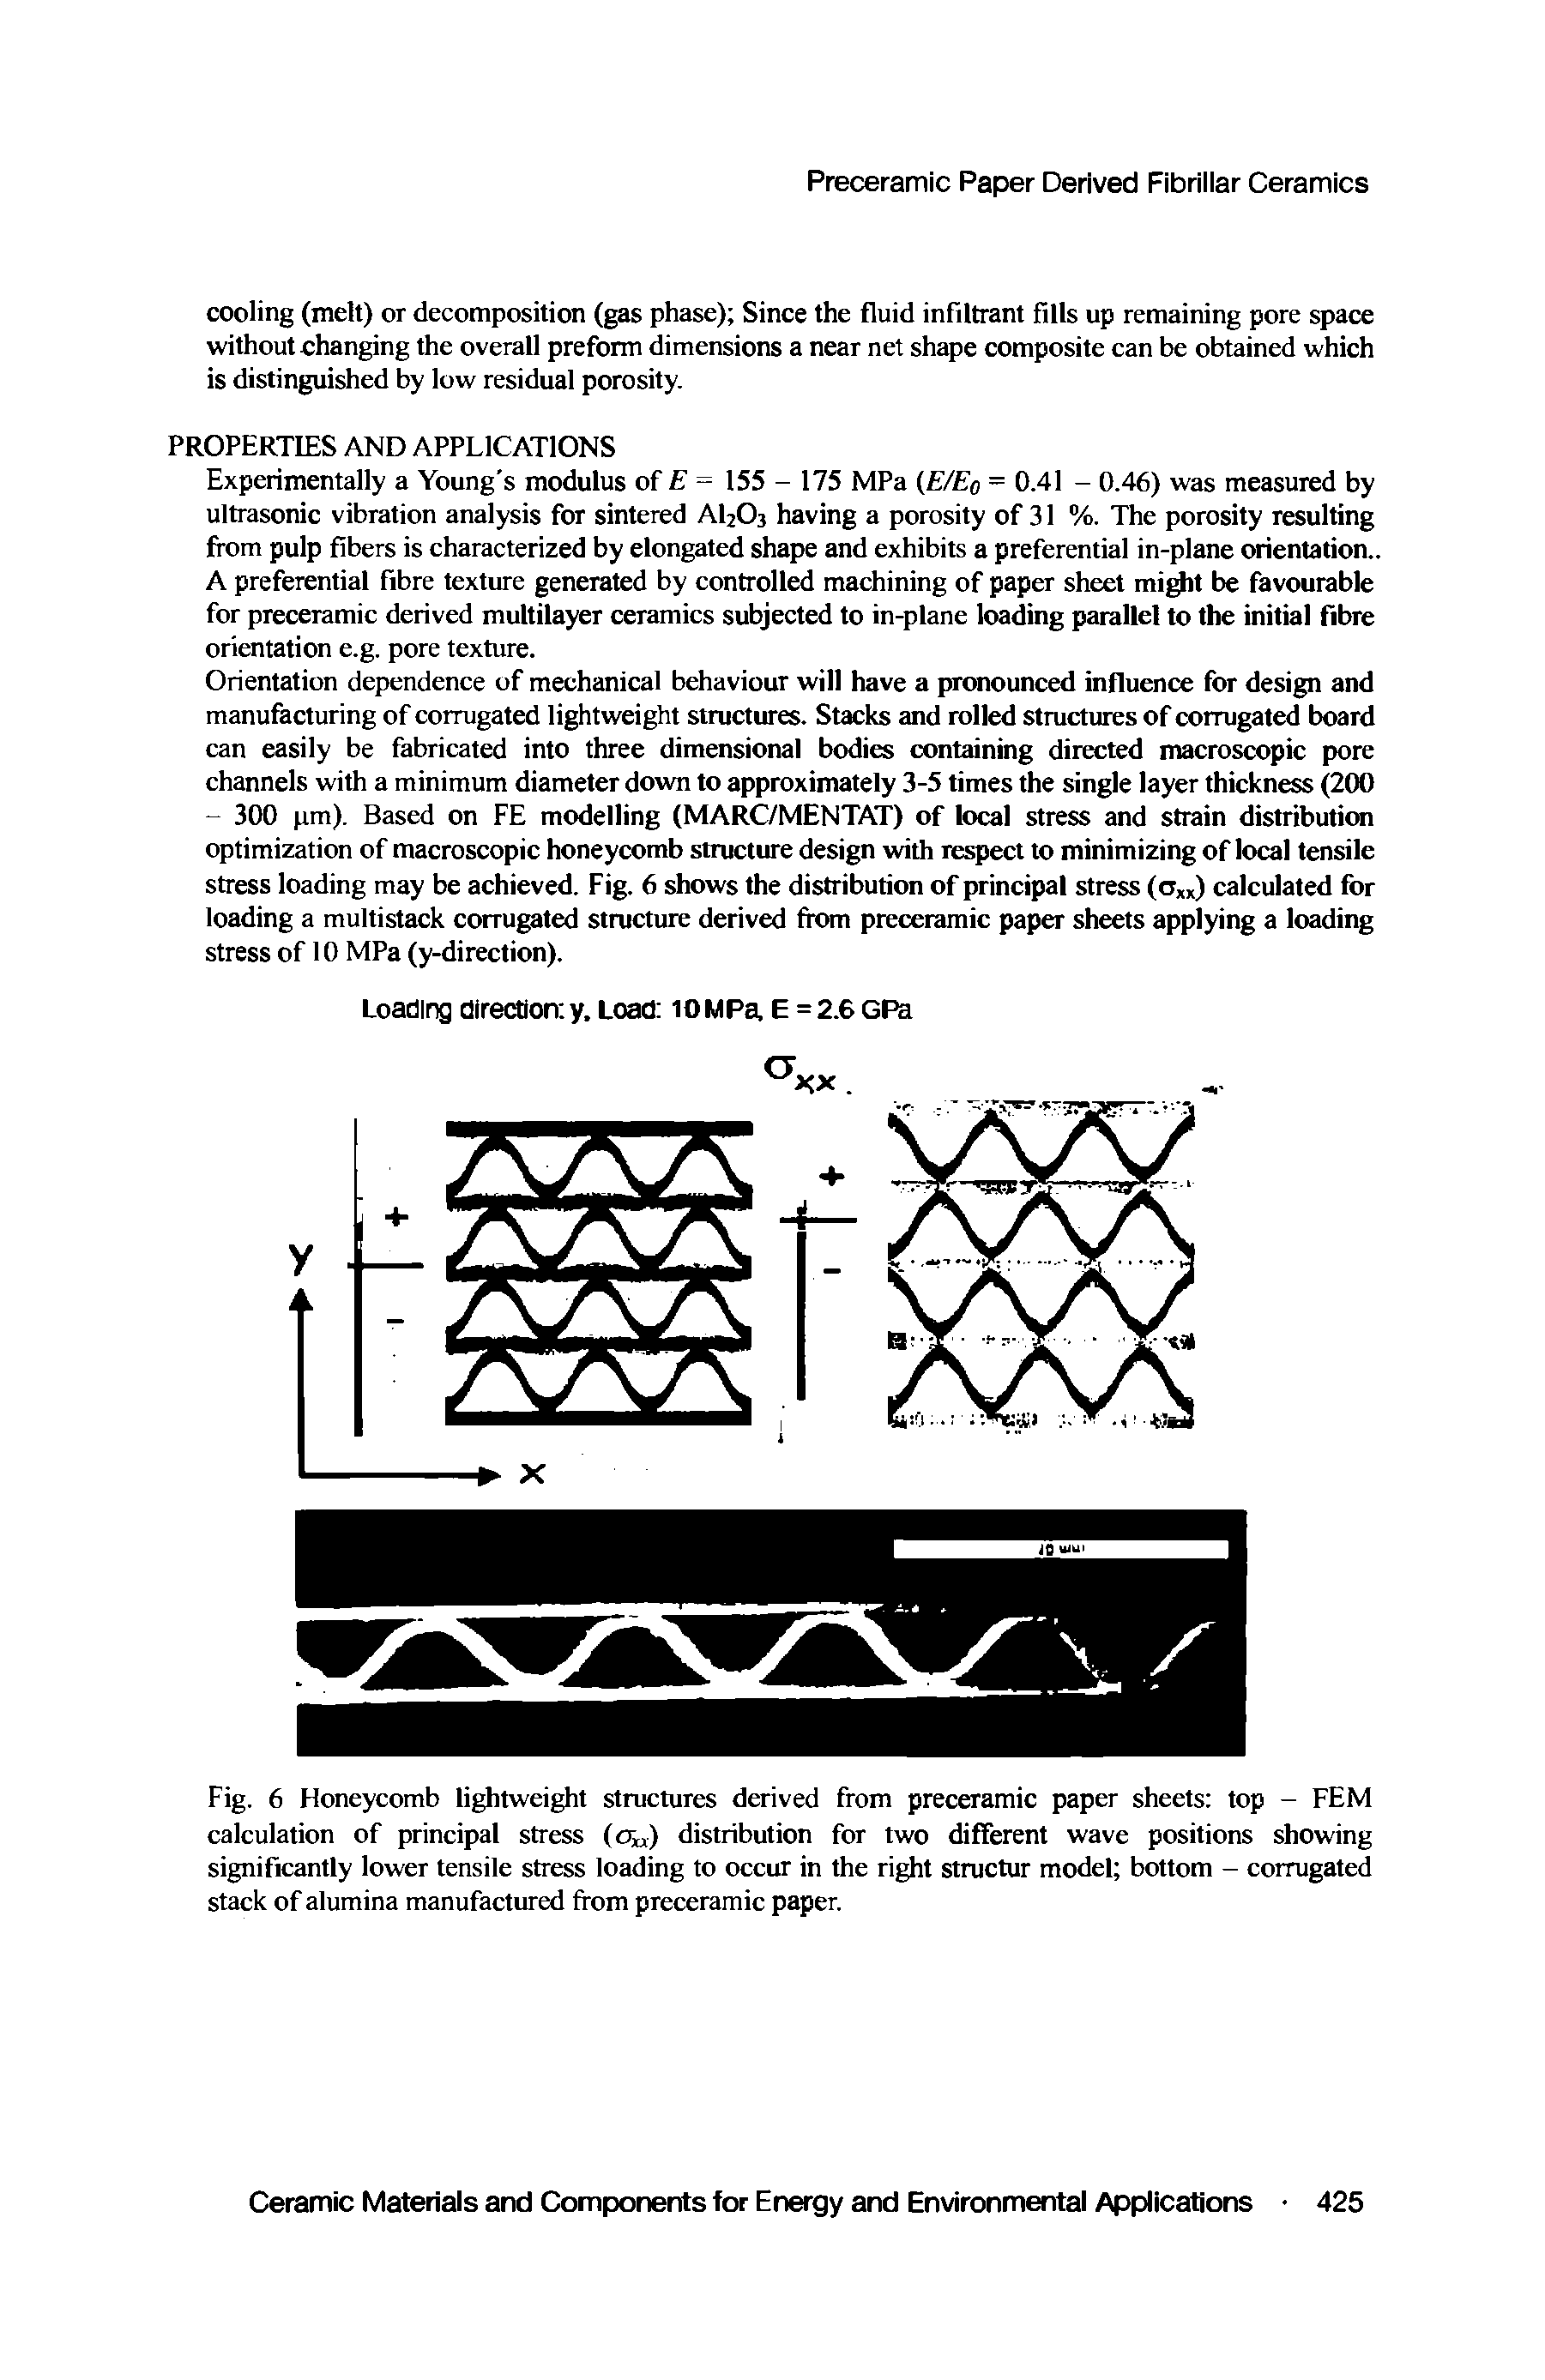 Fig. 6 Honeycomb lightweight structures derived from preceramic paper sheets top - FEM calculation of principal stress (oix) distribution for two different wave positions showing significantly lower tensile stress loading to occur in the right structur model bottom - corrugated stack of alumina manufactured from preceramic paper.